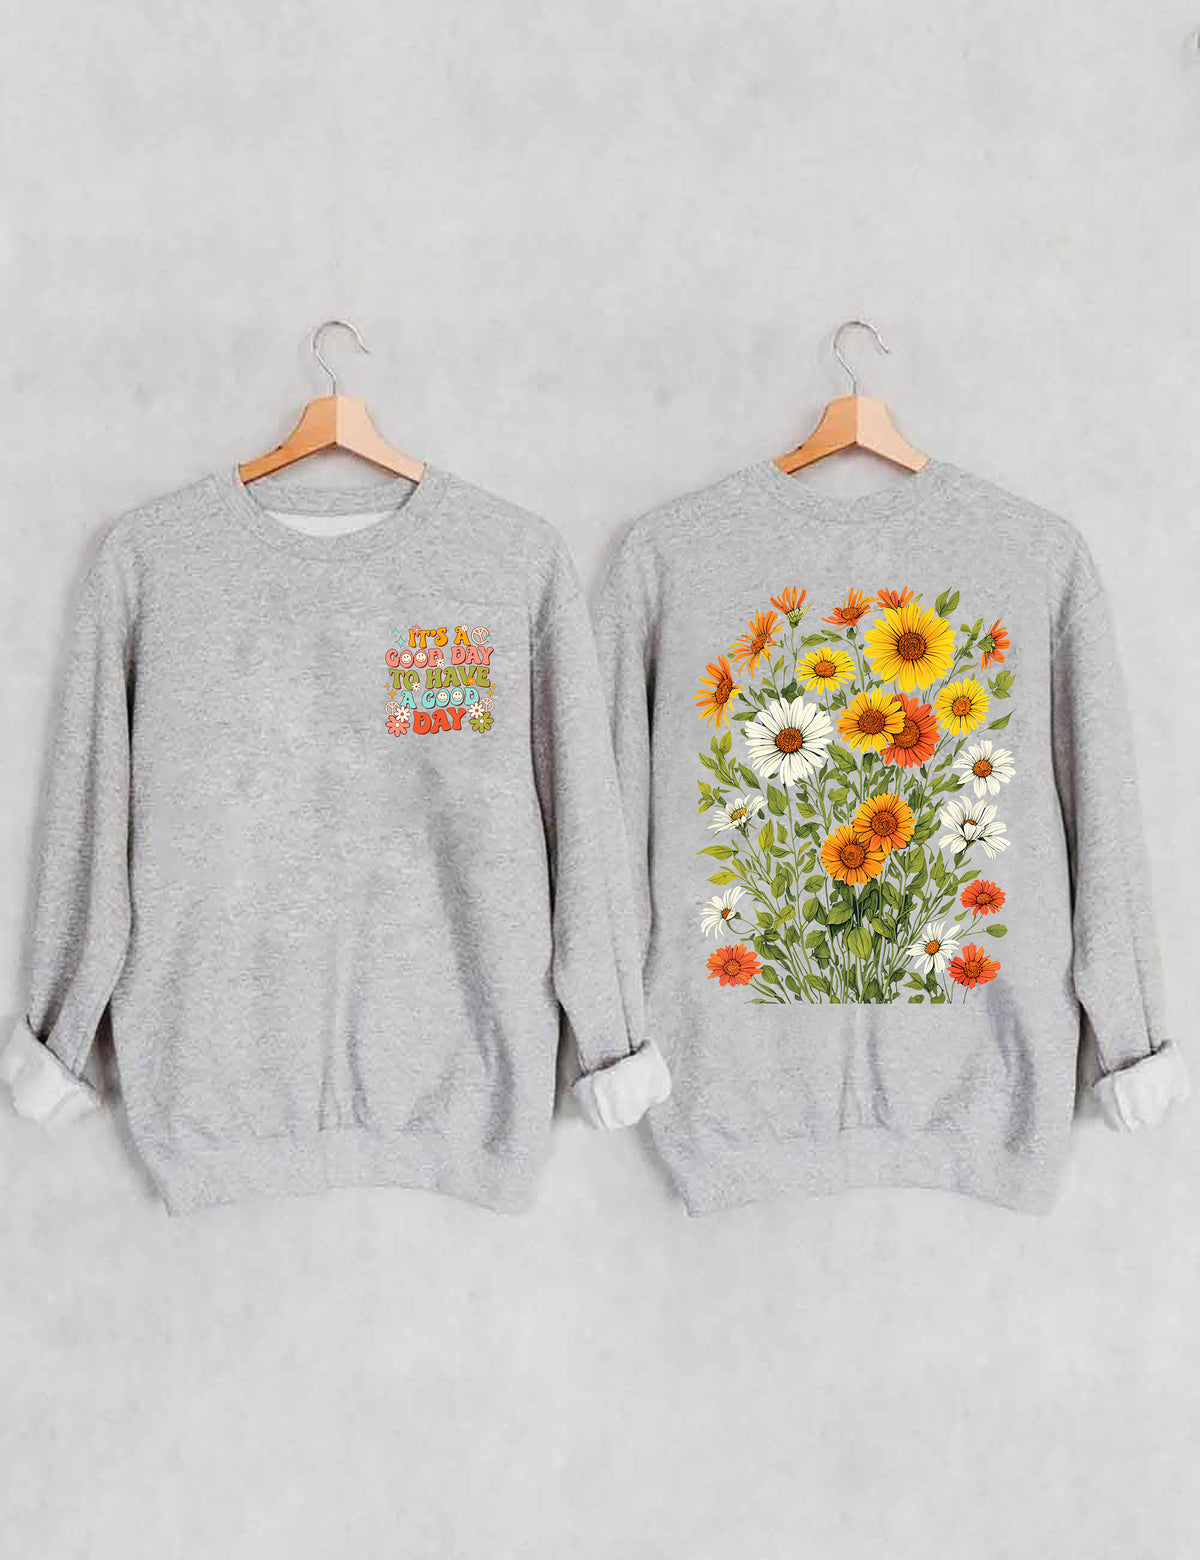 It's a Good Day To Have a Good Day Sweatshirt